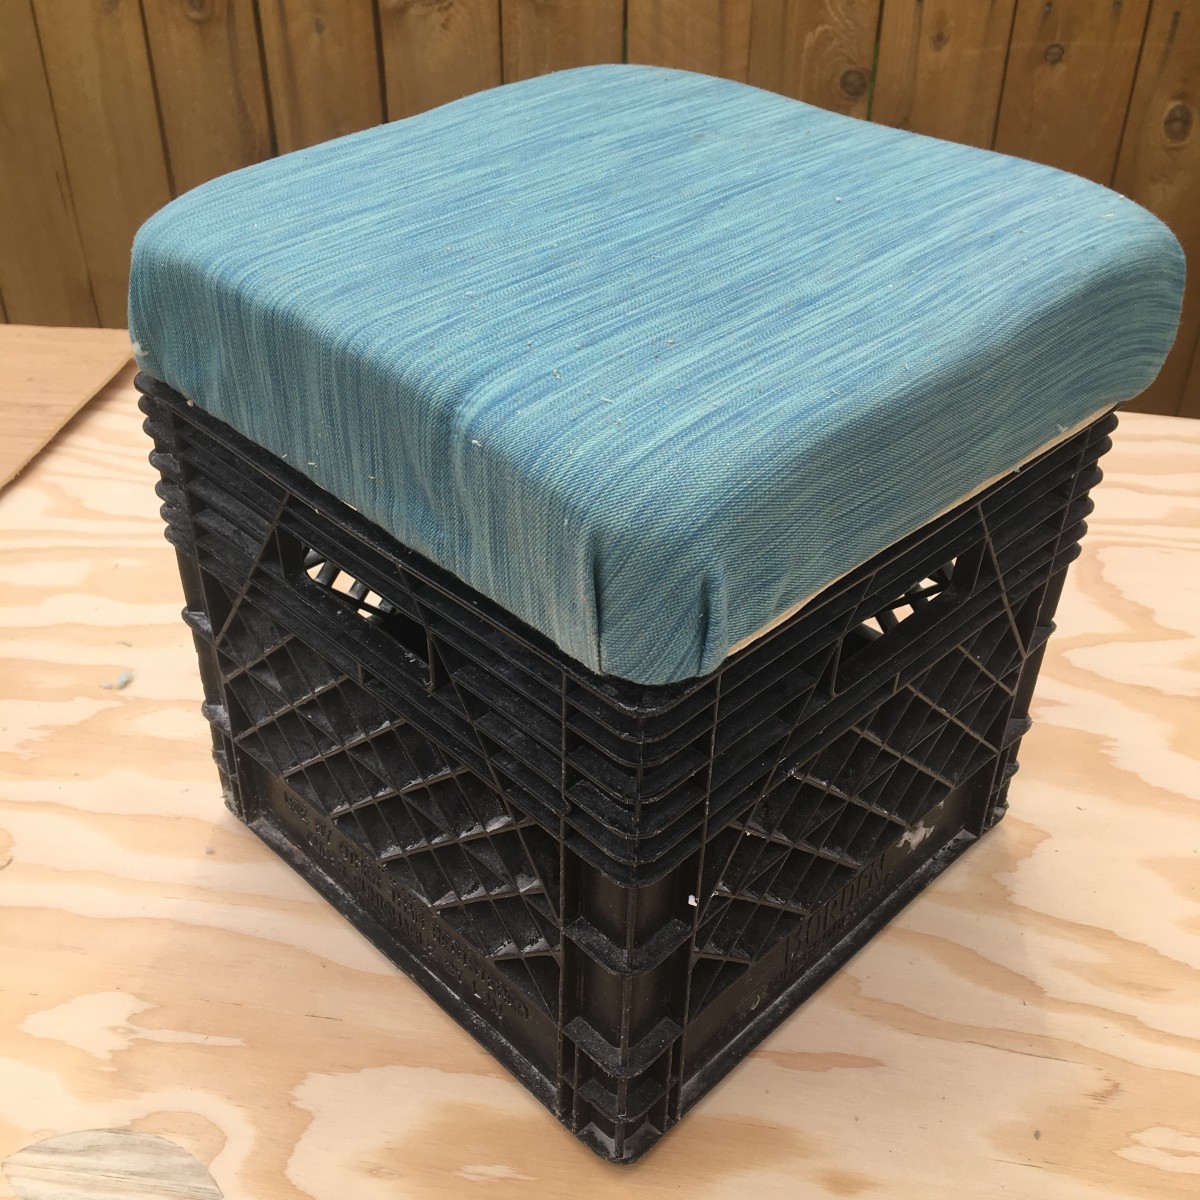 The completed milk crate ottoman